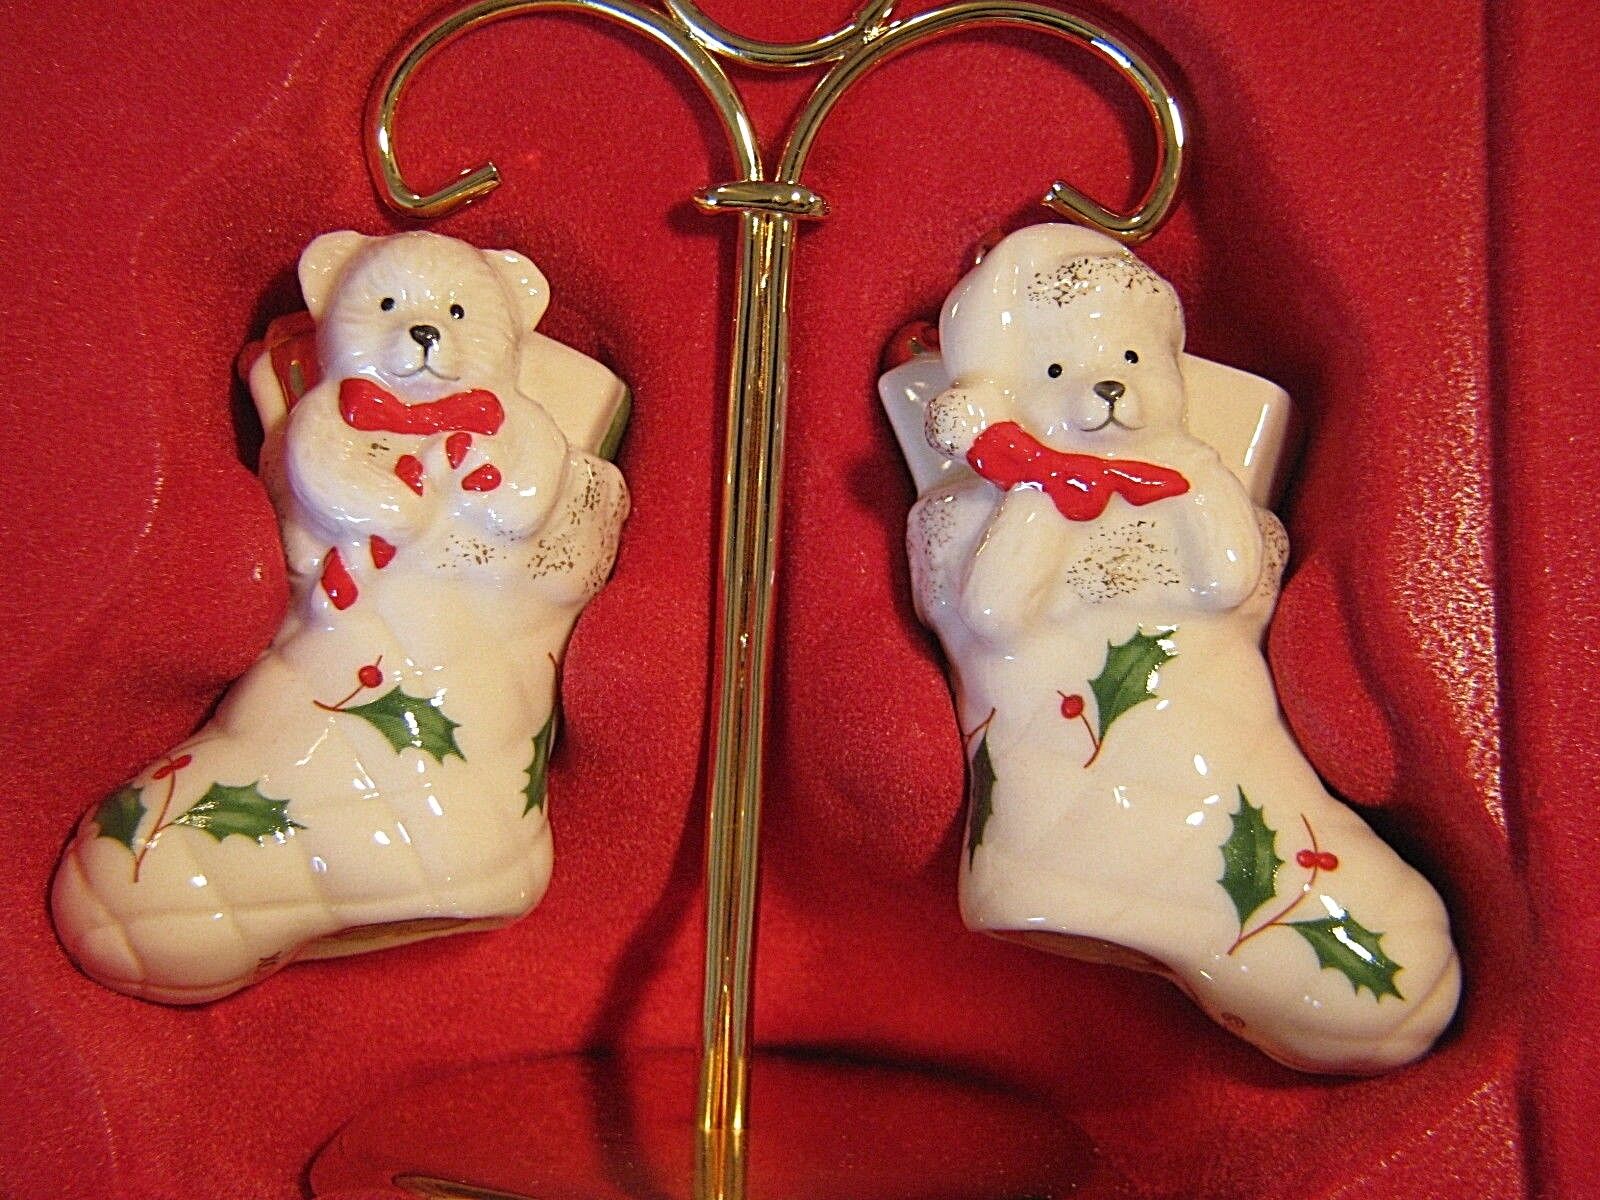 CUTE LENOX CHRISTMAS HOLIDAY STOCKINGS SALT & PEPPER SHAKERS W/ GOLD STAND - NEW Lenox